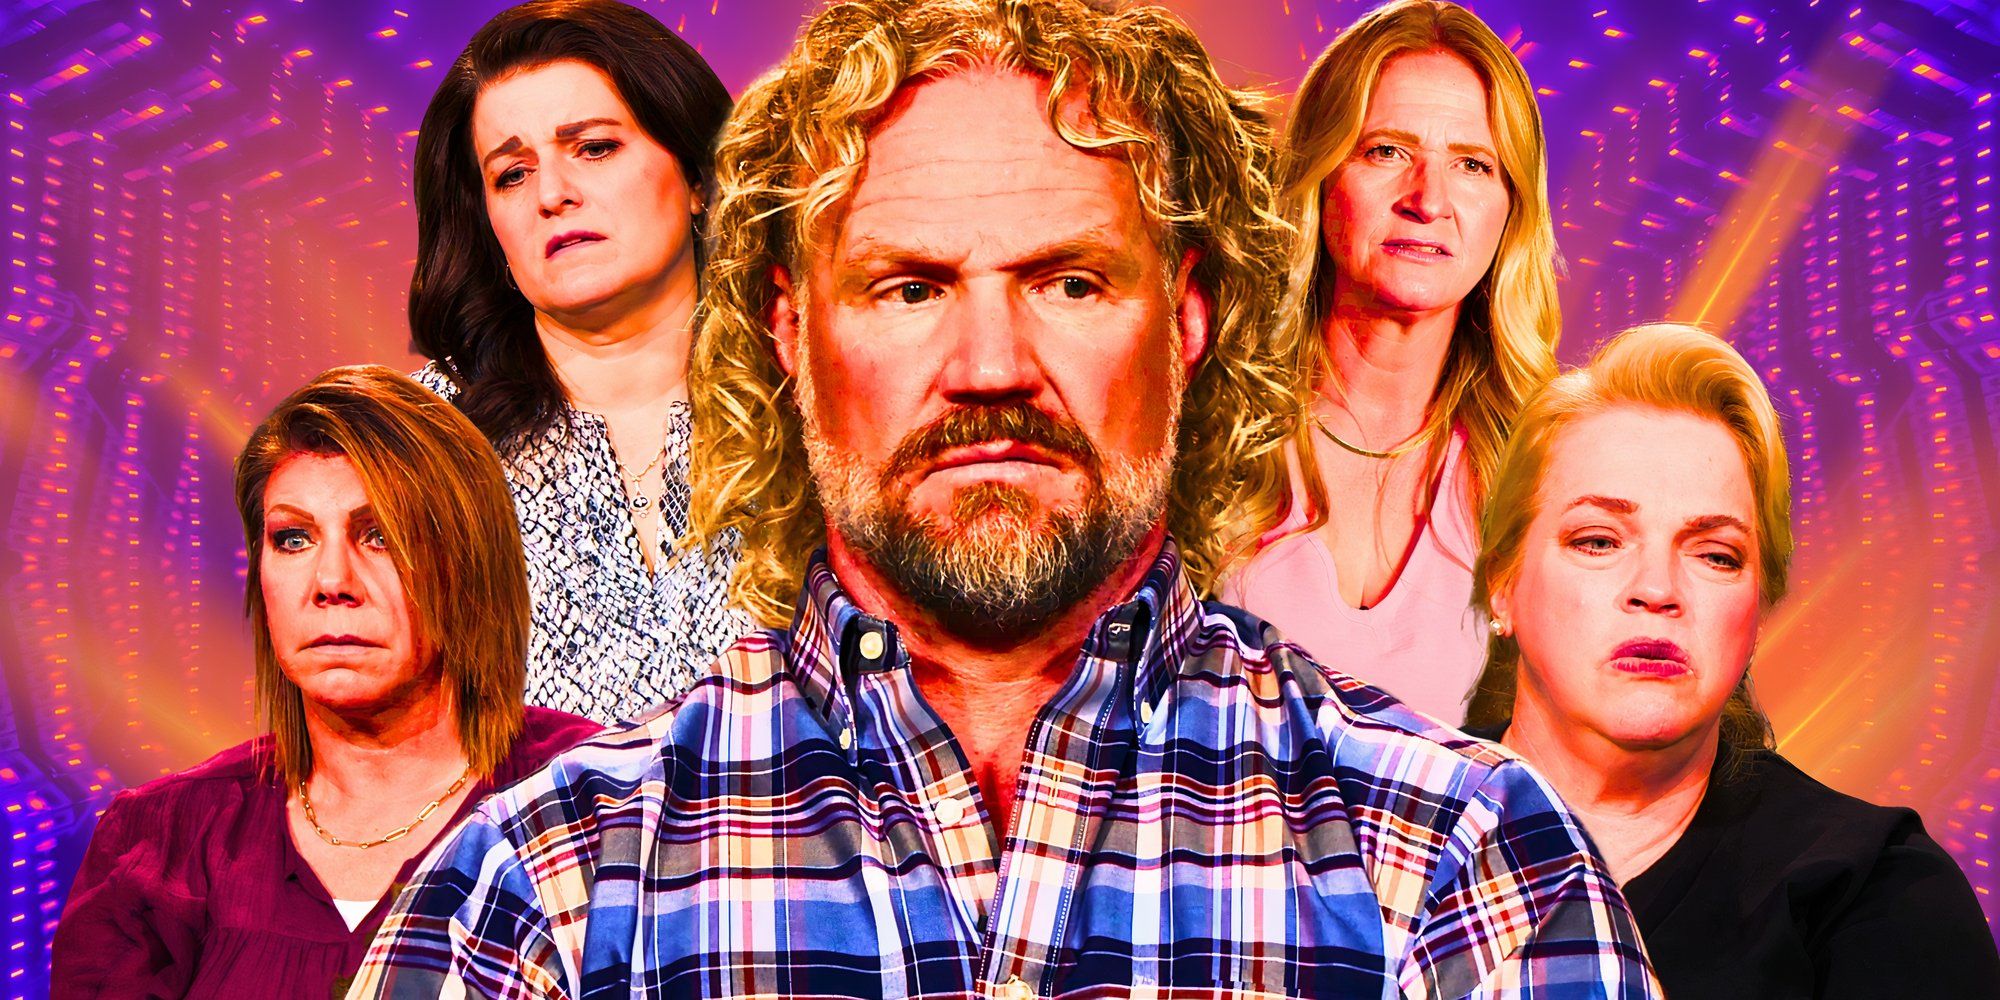 Sister wives' Kody Brown looking sad with his four wives behind him also sad